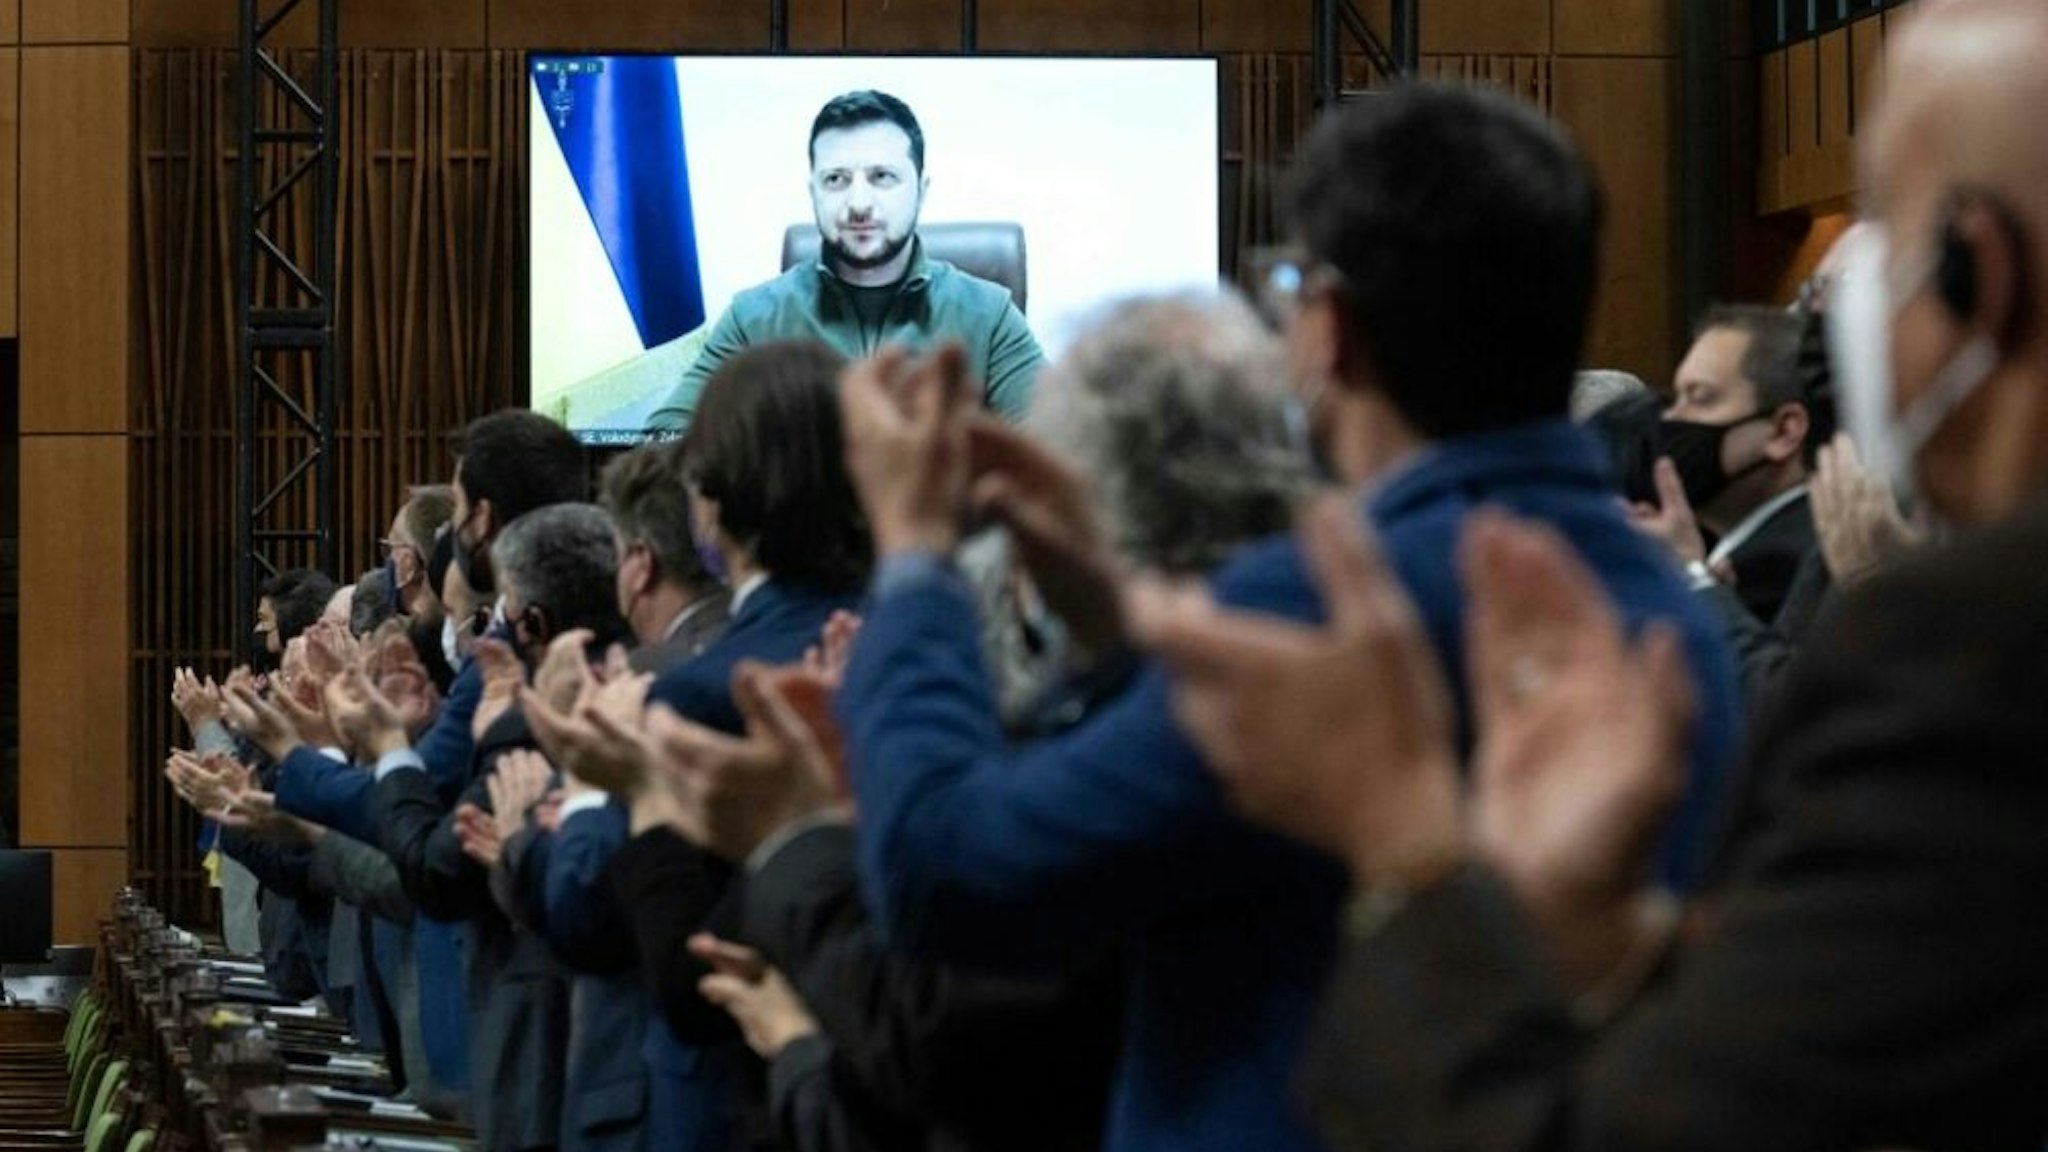 Canadian Members of Parliament and invited guests applaud Ukrainian President Volodymyr Zelensky before virtually addressing the Canadian Parliament, March 15, 2022 in Ottawa.